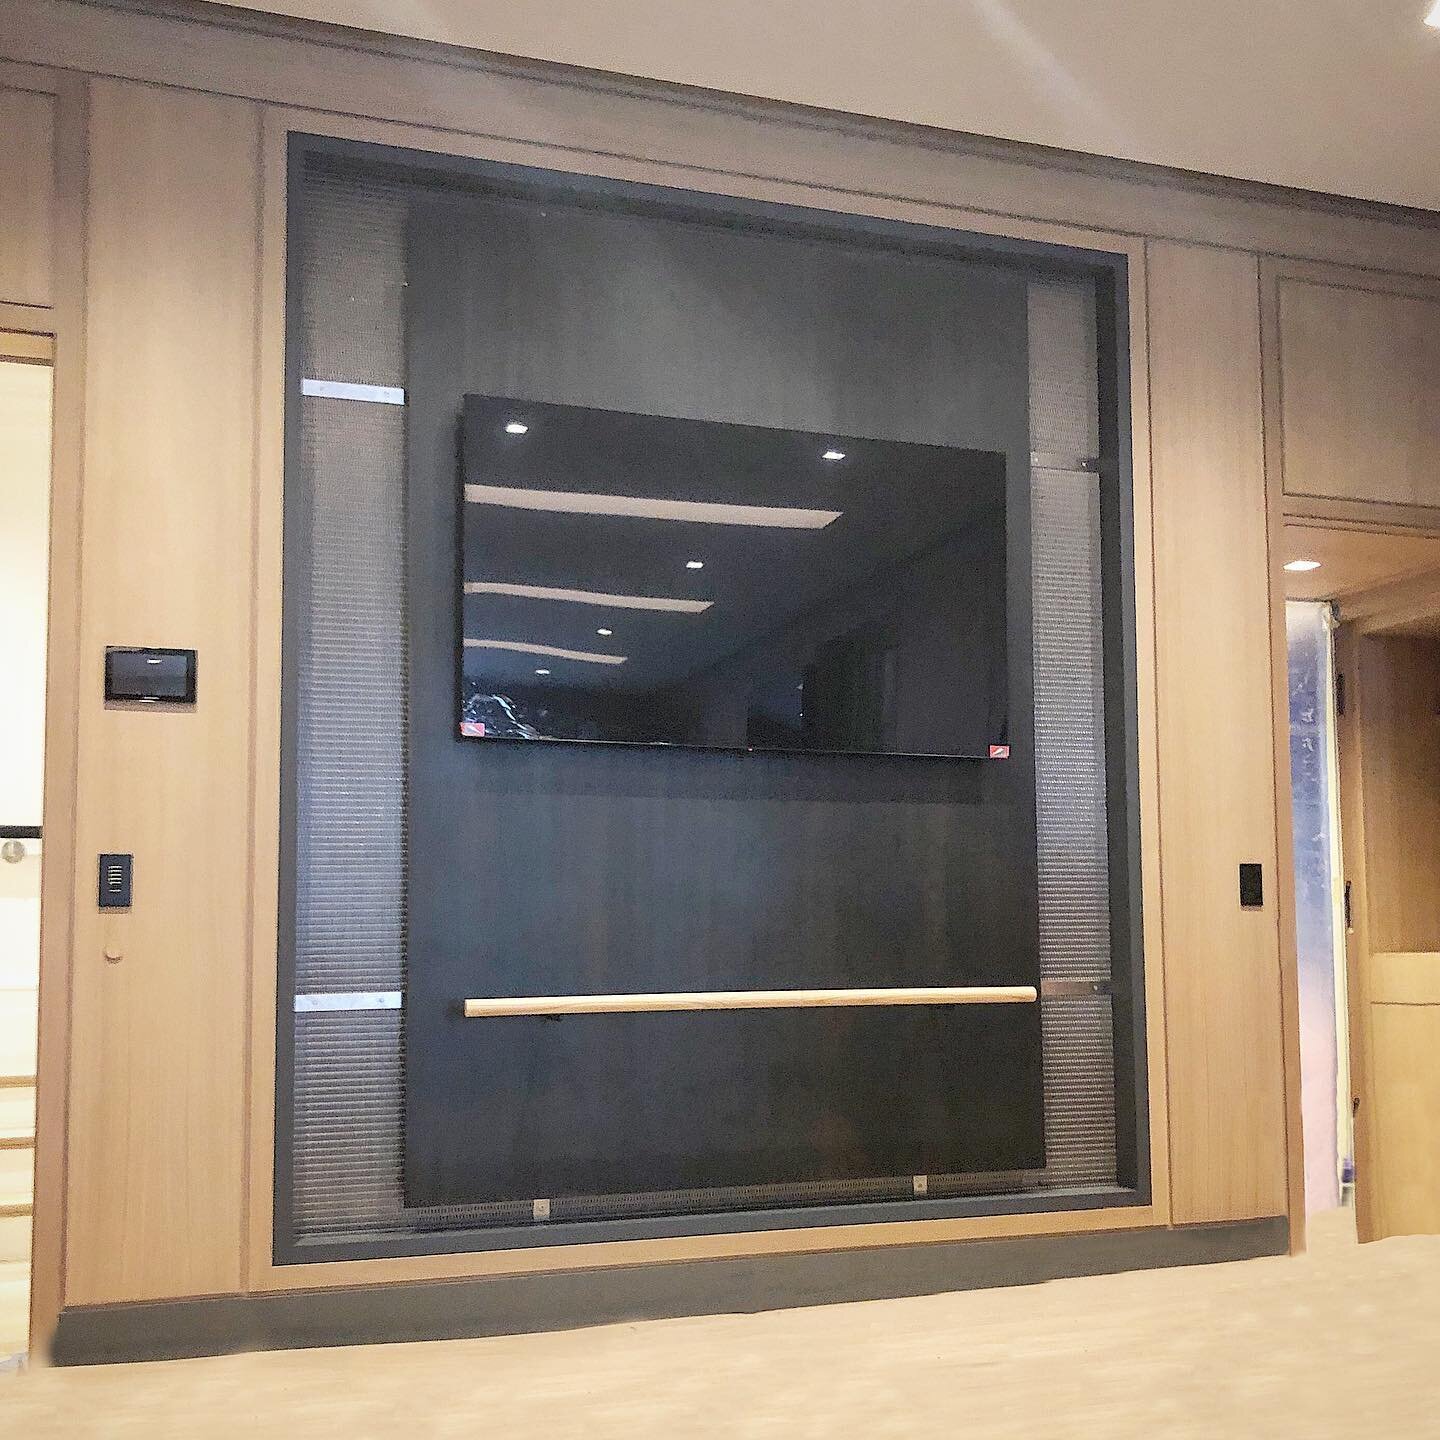 This framed niche with a woven stainless cloth backdrop pinned to the wall with brushed 1/8&rdquo; straps and countersunk screws holds an oversized floating 1/4&rdquo; blackened steel panel with integrated ballet bar and a 56&rdquo; TV. A gym like th